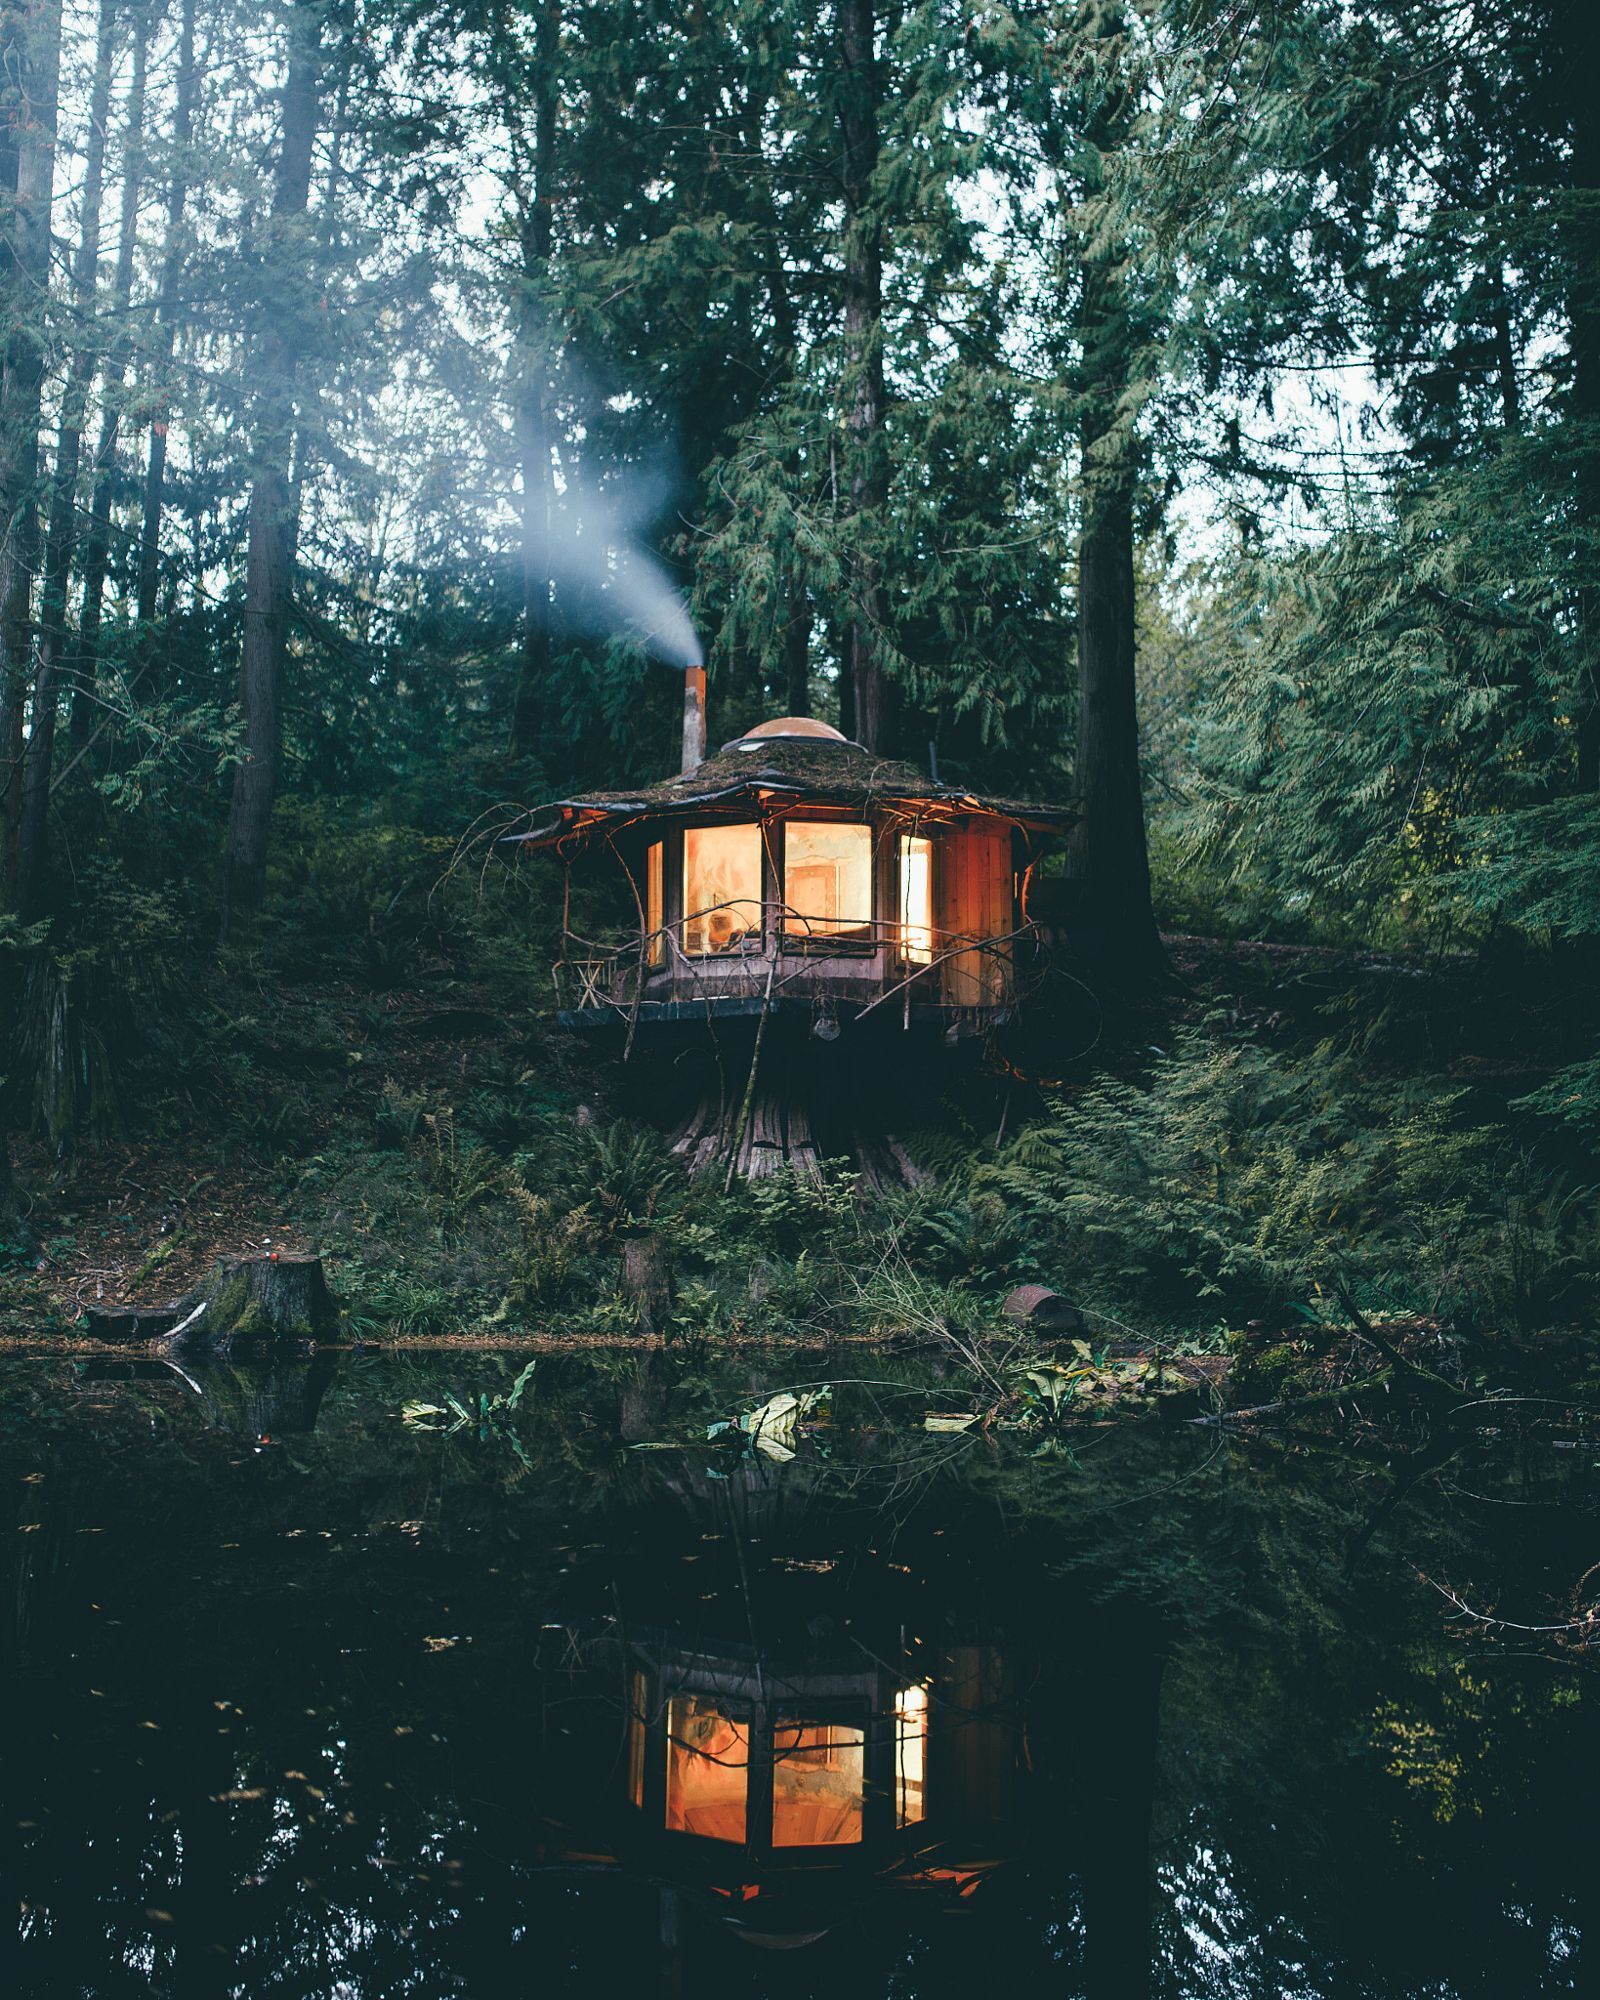 A small treehouse on a tree in the middle of a forest - Cozy